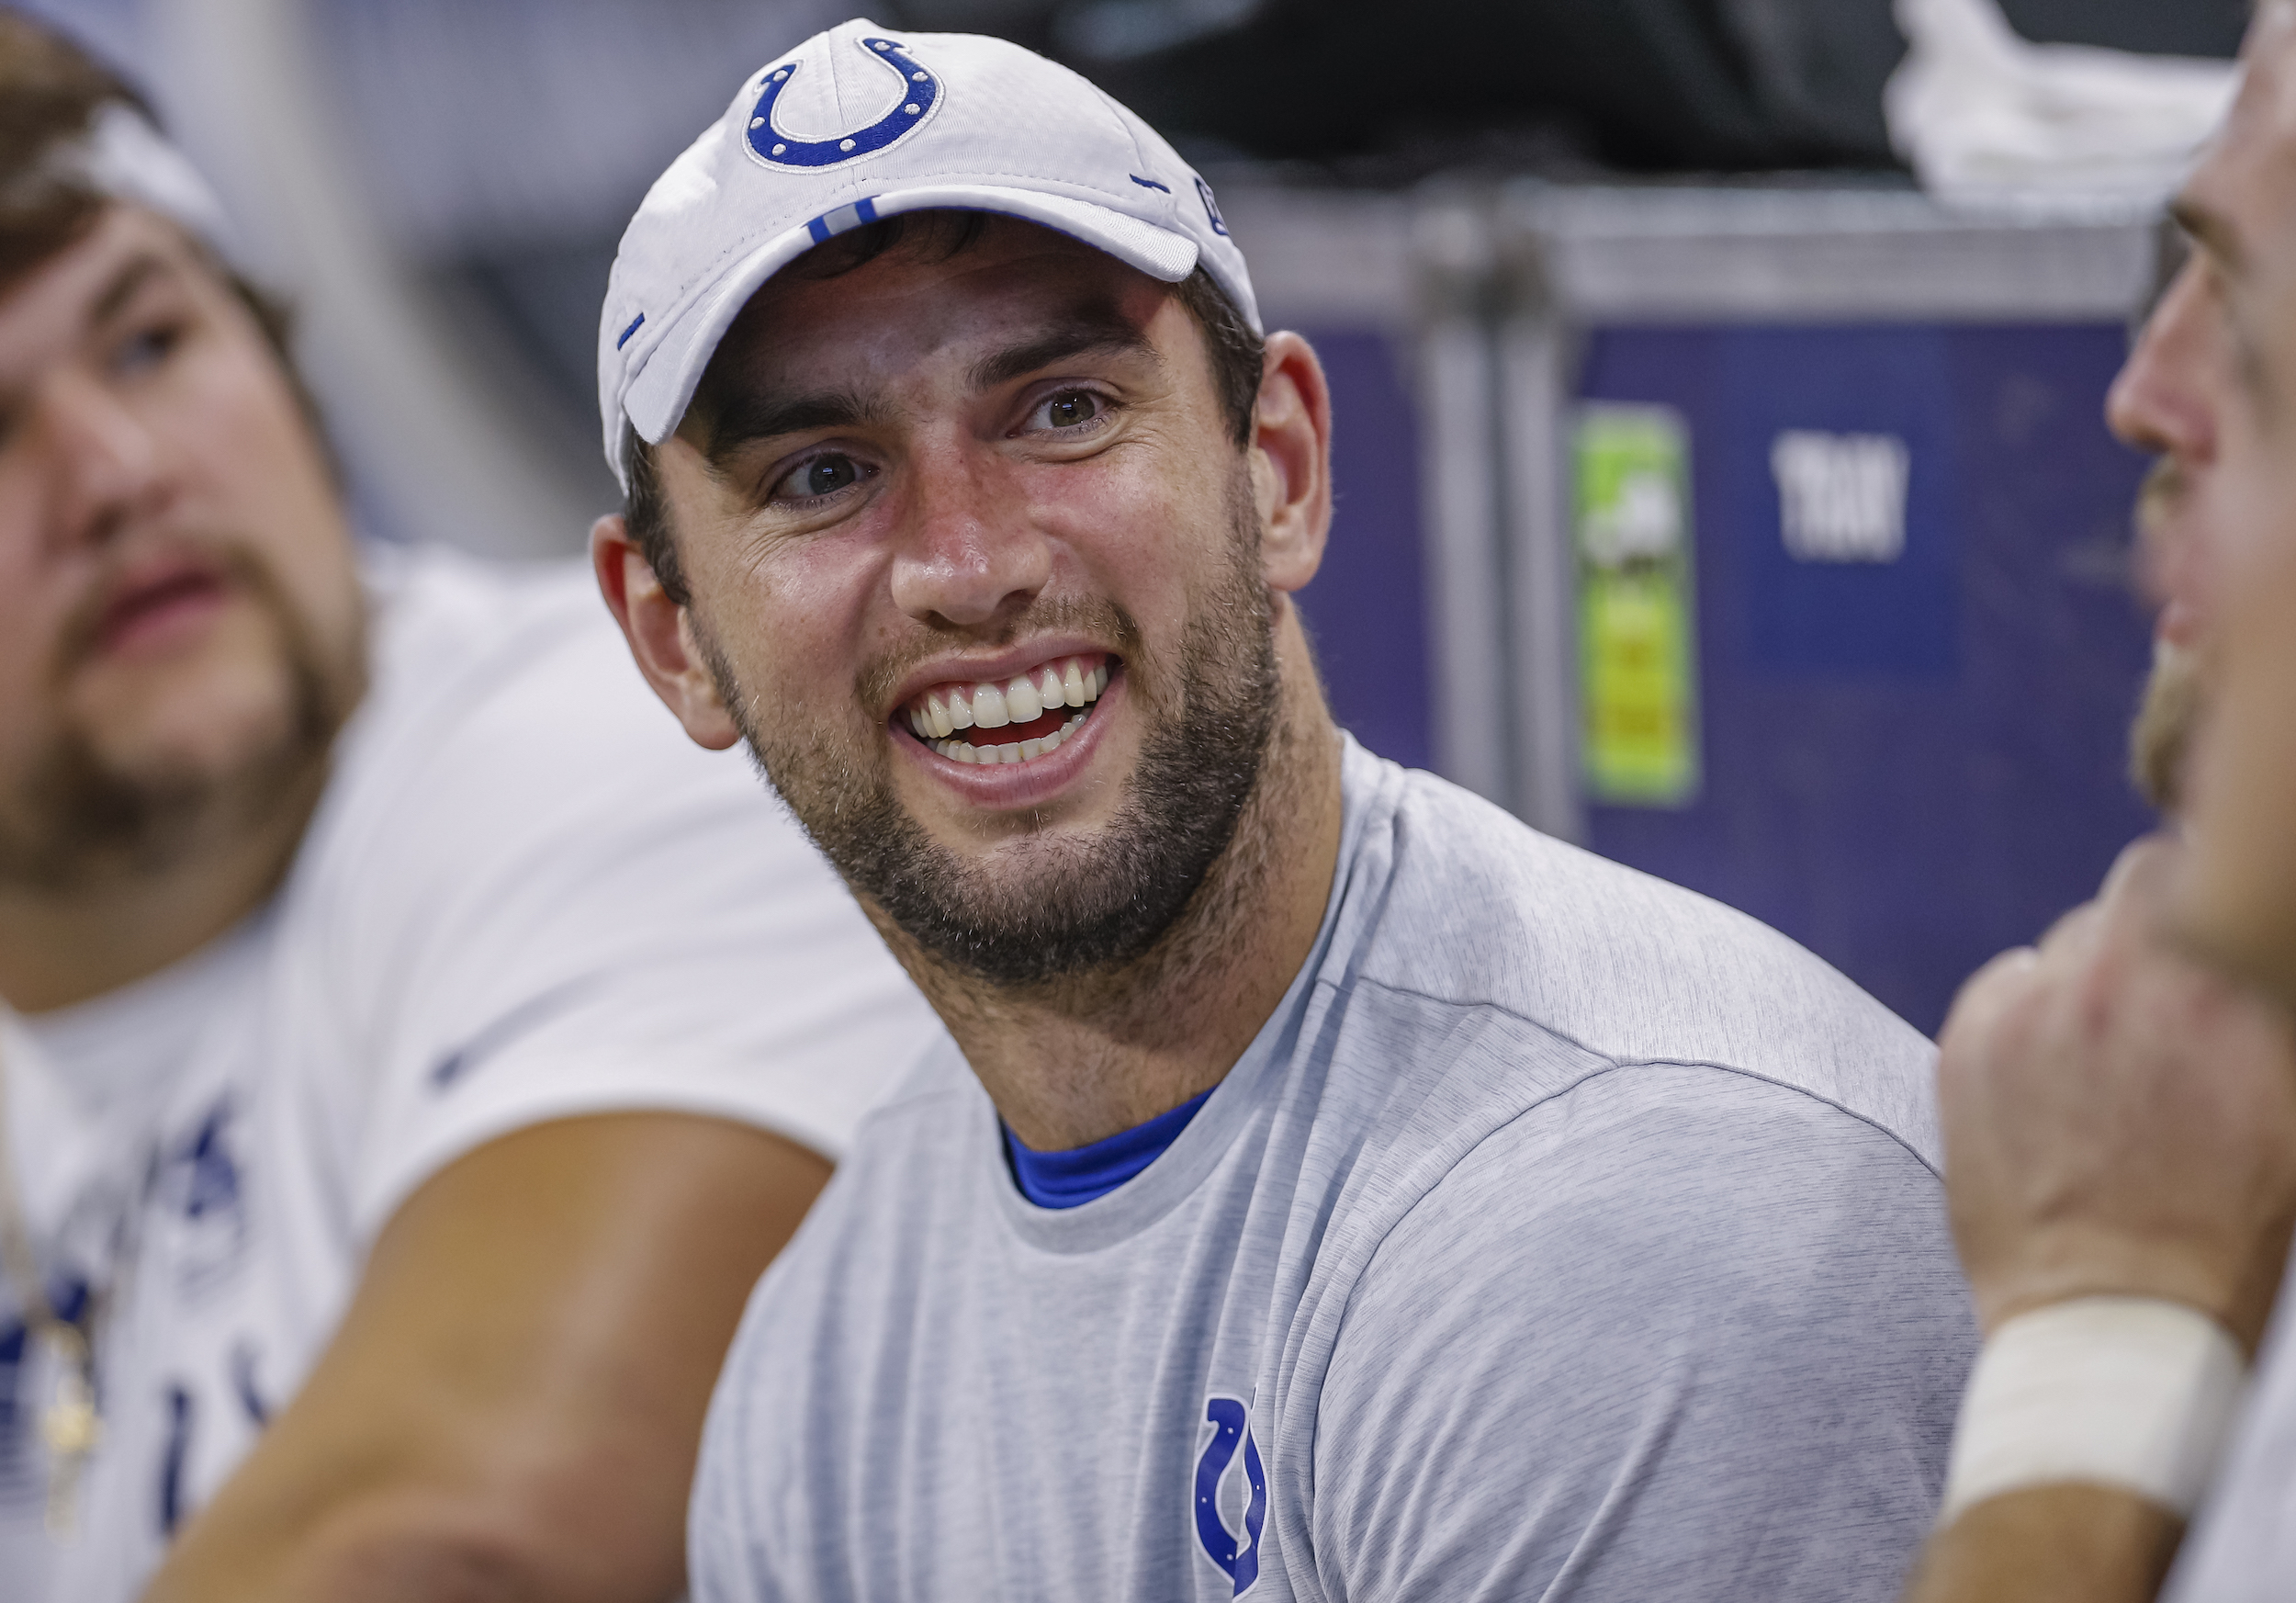 Andrew Luck #12 of the Indianapolis Colts is seen during the preseason game against the Cleveland Browns at Lucas Oil Stadium on August 17, 2019 in Indianapolis, Indiana.